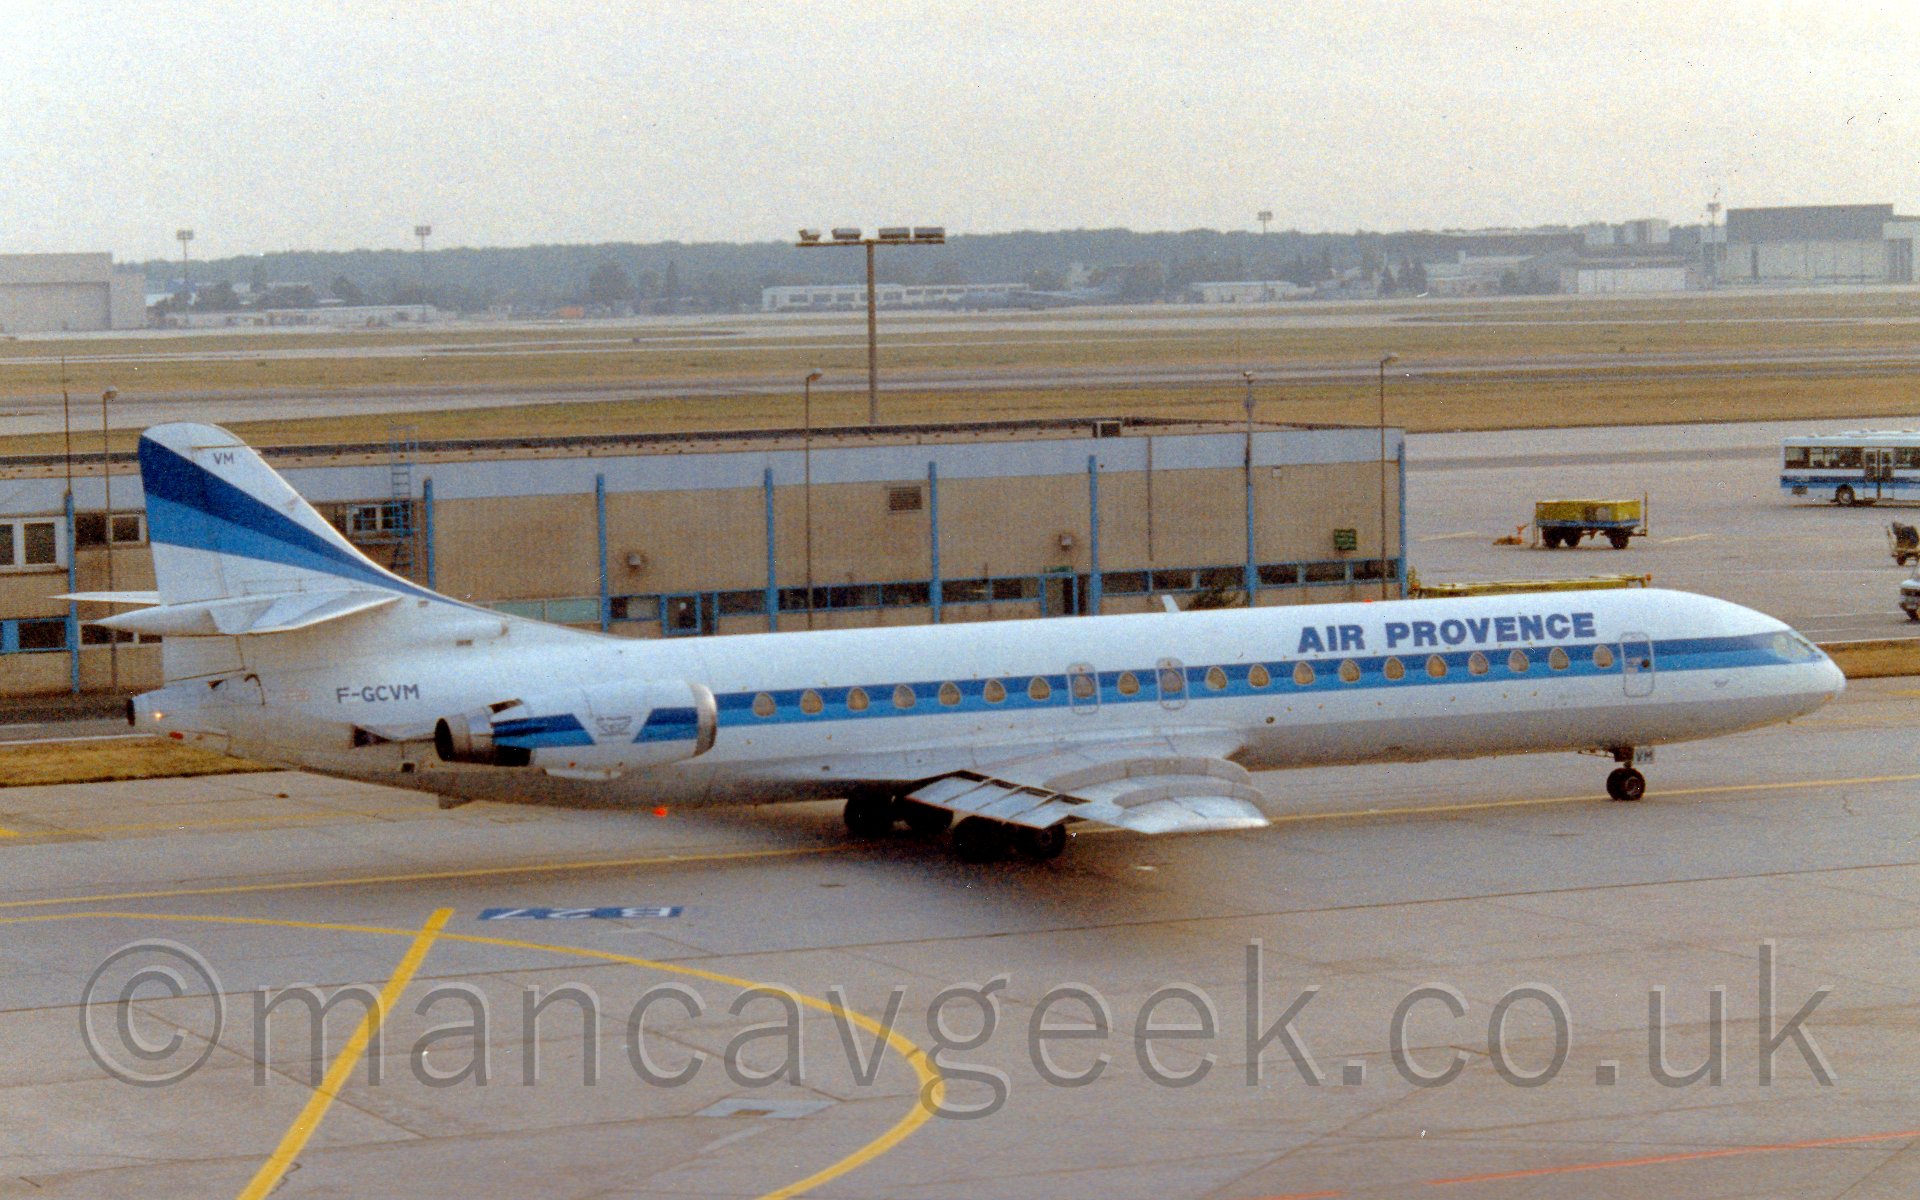 Side view of a twin engined jet airliner with the engines mounted on the rear fuselage taxiing from left to right. The plane is mostly white, with a thick light and dark blue running along the fuselage, covering the passenger cabin windows, and over the engines, with another diagonal stripe running up the tail. There are dark blue "Air Provence" titles on the upper forward fuselage. In the background, there is a low, sandy brownbuilding that extends 2/3rds of the way into the frame from the left, with a single deck bus on the right, wearing a similar colour scheme to the plane. In the far distance, more buildings are visible on the far side of the airport, with rows of trees behind that, fading into haze.